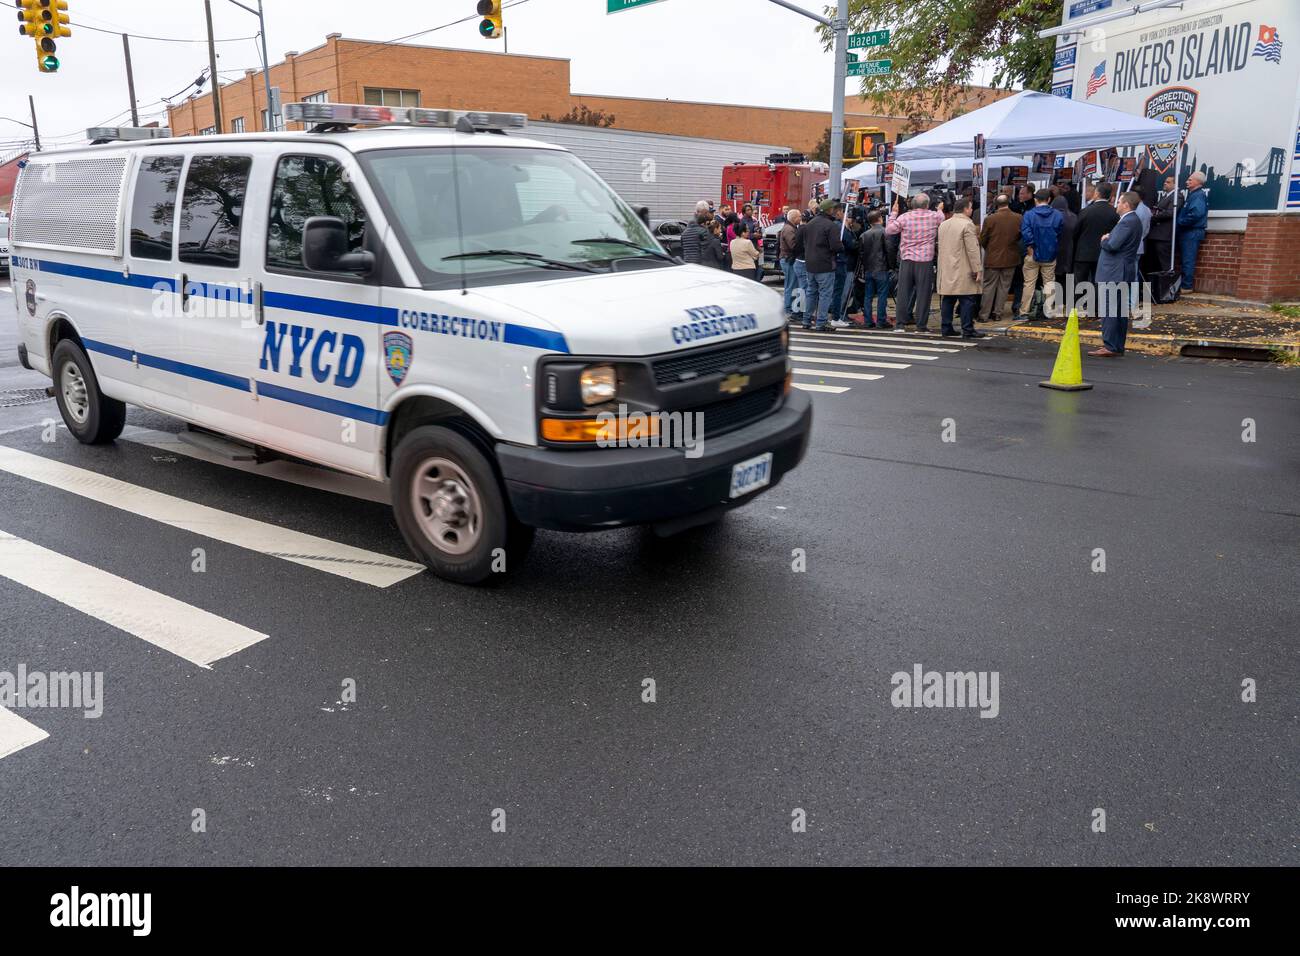 New York, United States. 24th Oct, 2022. A New York City Department of Correction vehicle seen near an endorsement press conference by the New York City Correction Officers Benevolent Association (COBA) of Congressman Zeldin for Governor of New York next to the Rikers Island sign in the Queens borough of New York City. Congressman Zeldin is endorsed by many of New York State law-enforcement unions. Credit: SOPA Images Limited/Alamy Live News Stock Photo